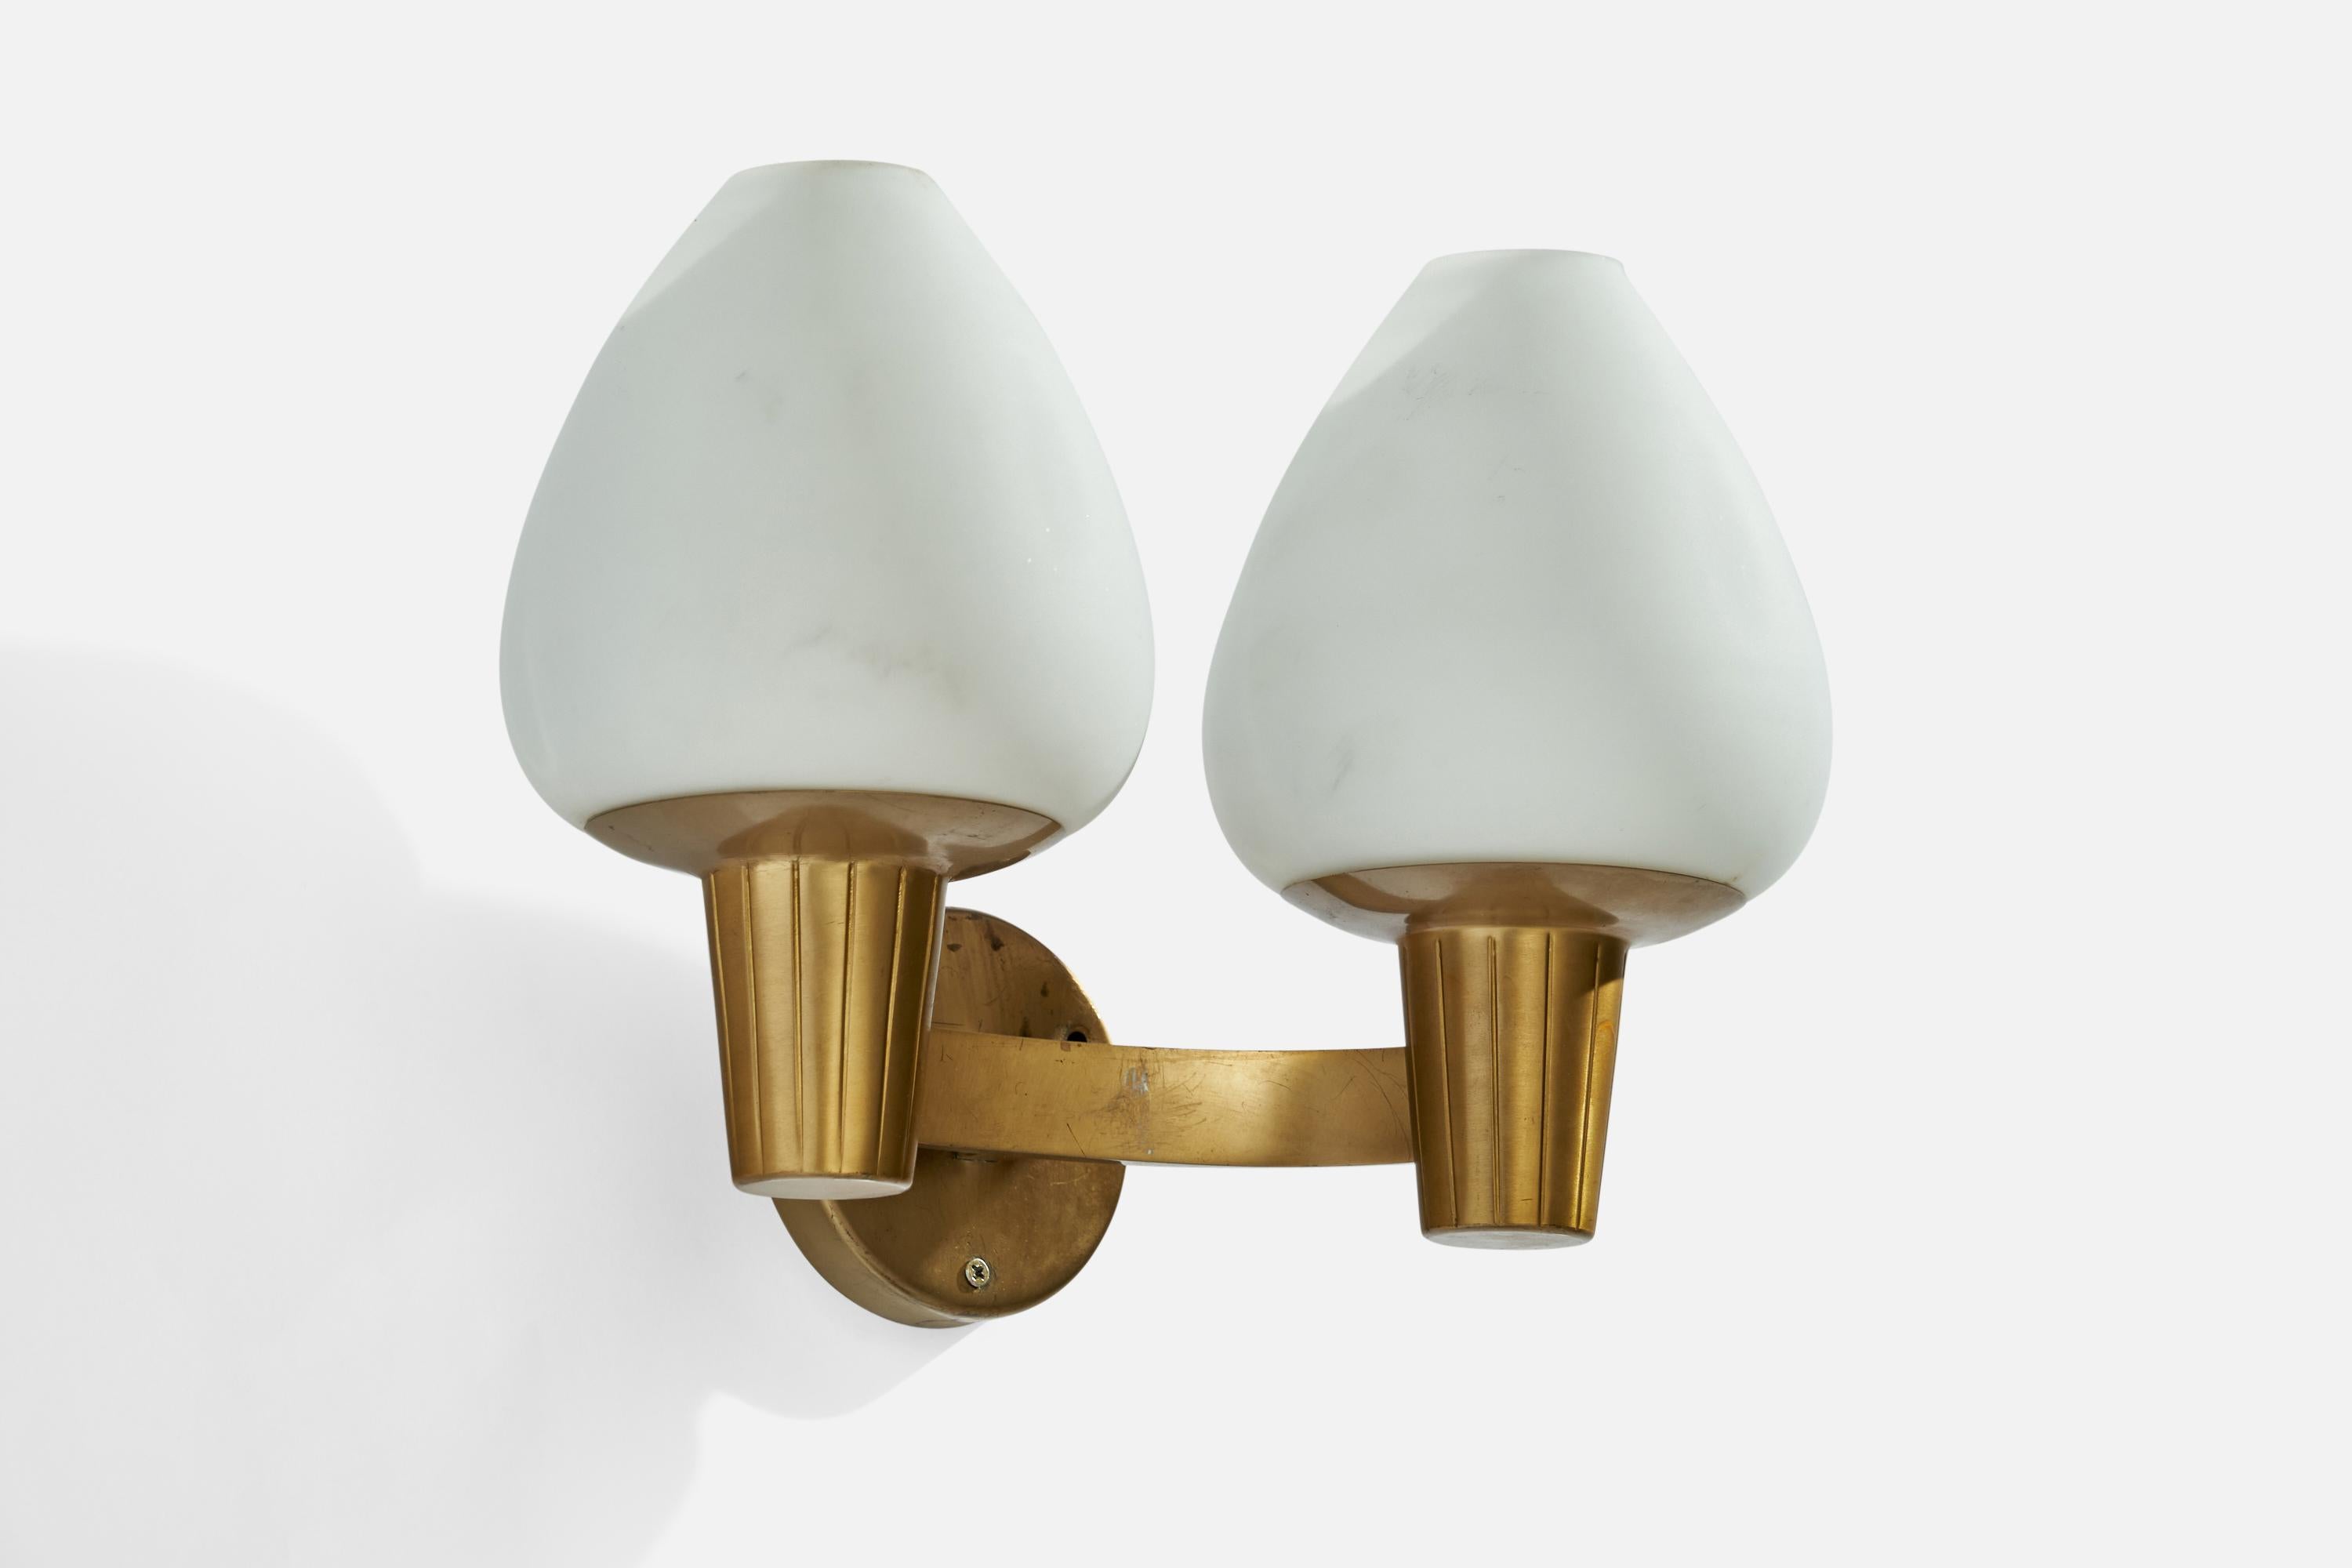 A brass and opaline glass wall light designed and produced in Sweden, 1940s.

Overall Dimensions (inches): 10.5”  H x 12” W x 6” D
Back Plate Dimensions (inches): 3.5”  H x 3.5”  W x .75” D
Bulb Specifications: E-26 Bulb
Number of Sockets: 2
All